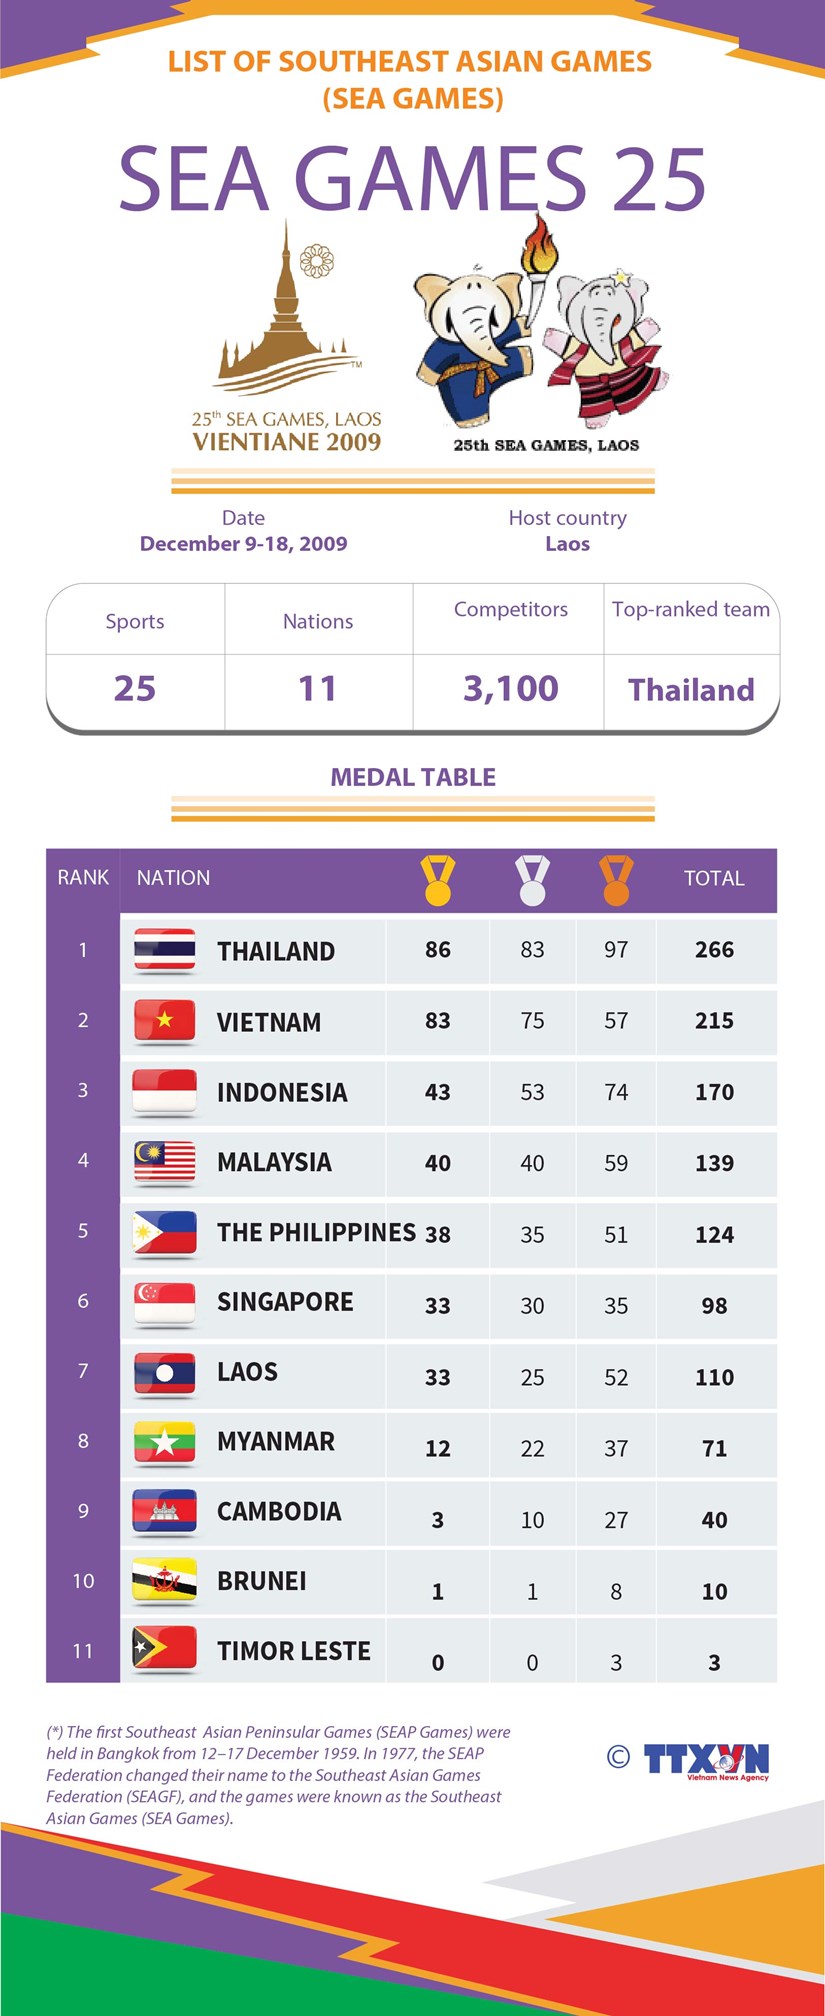 List of Southeast Asian Games: SEA Games 25 hinh anh 1